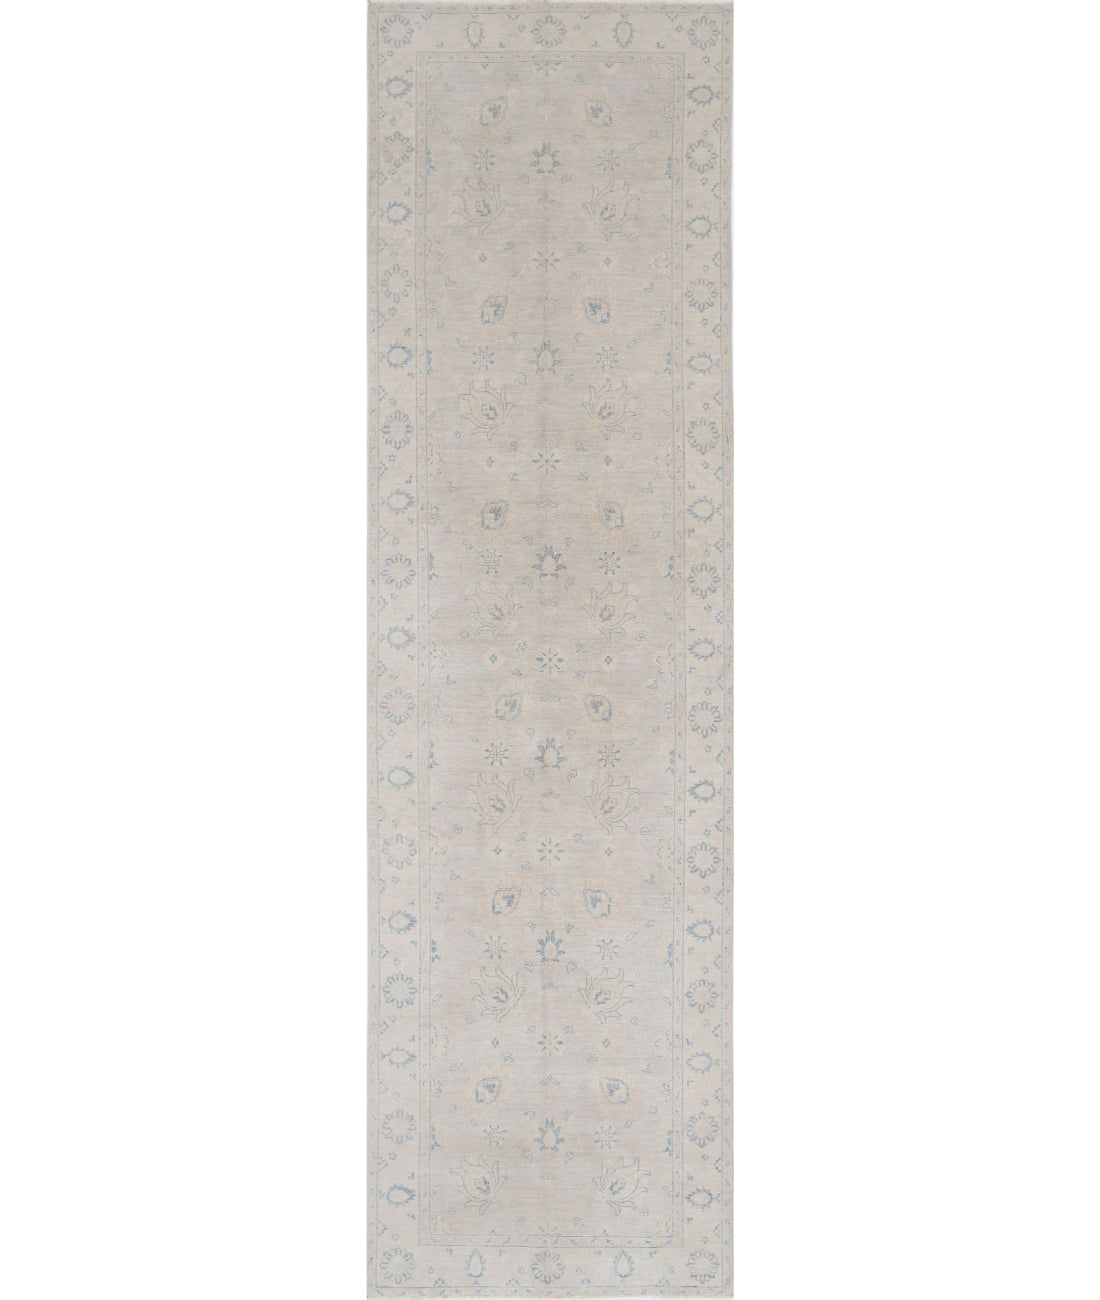 Hand Knotted Serenity Wool Rug - 3'11'' x 13'9'' 3'11'' x 13'9'' (118 X 413) / Brown / Ivory